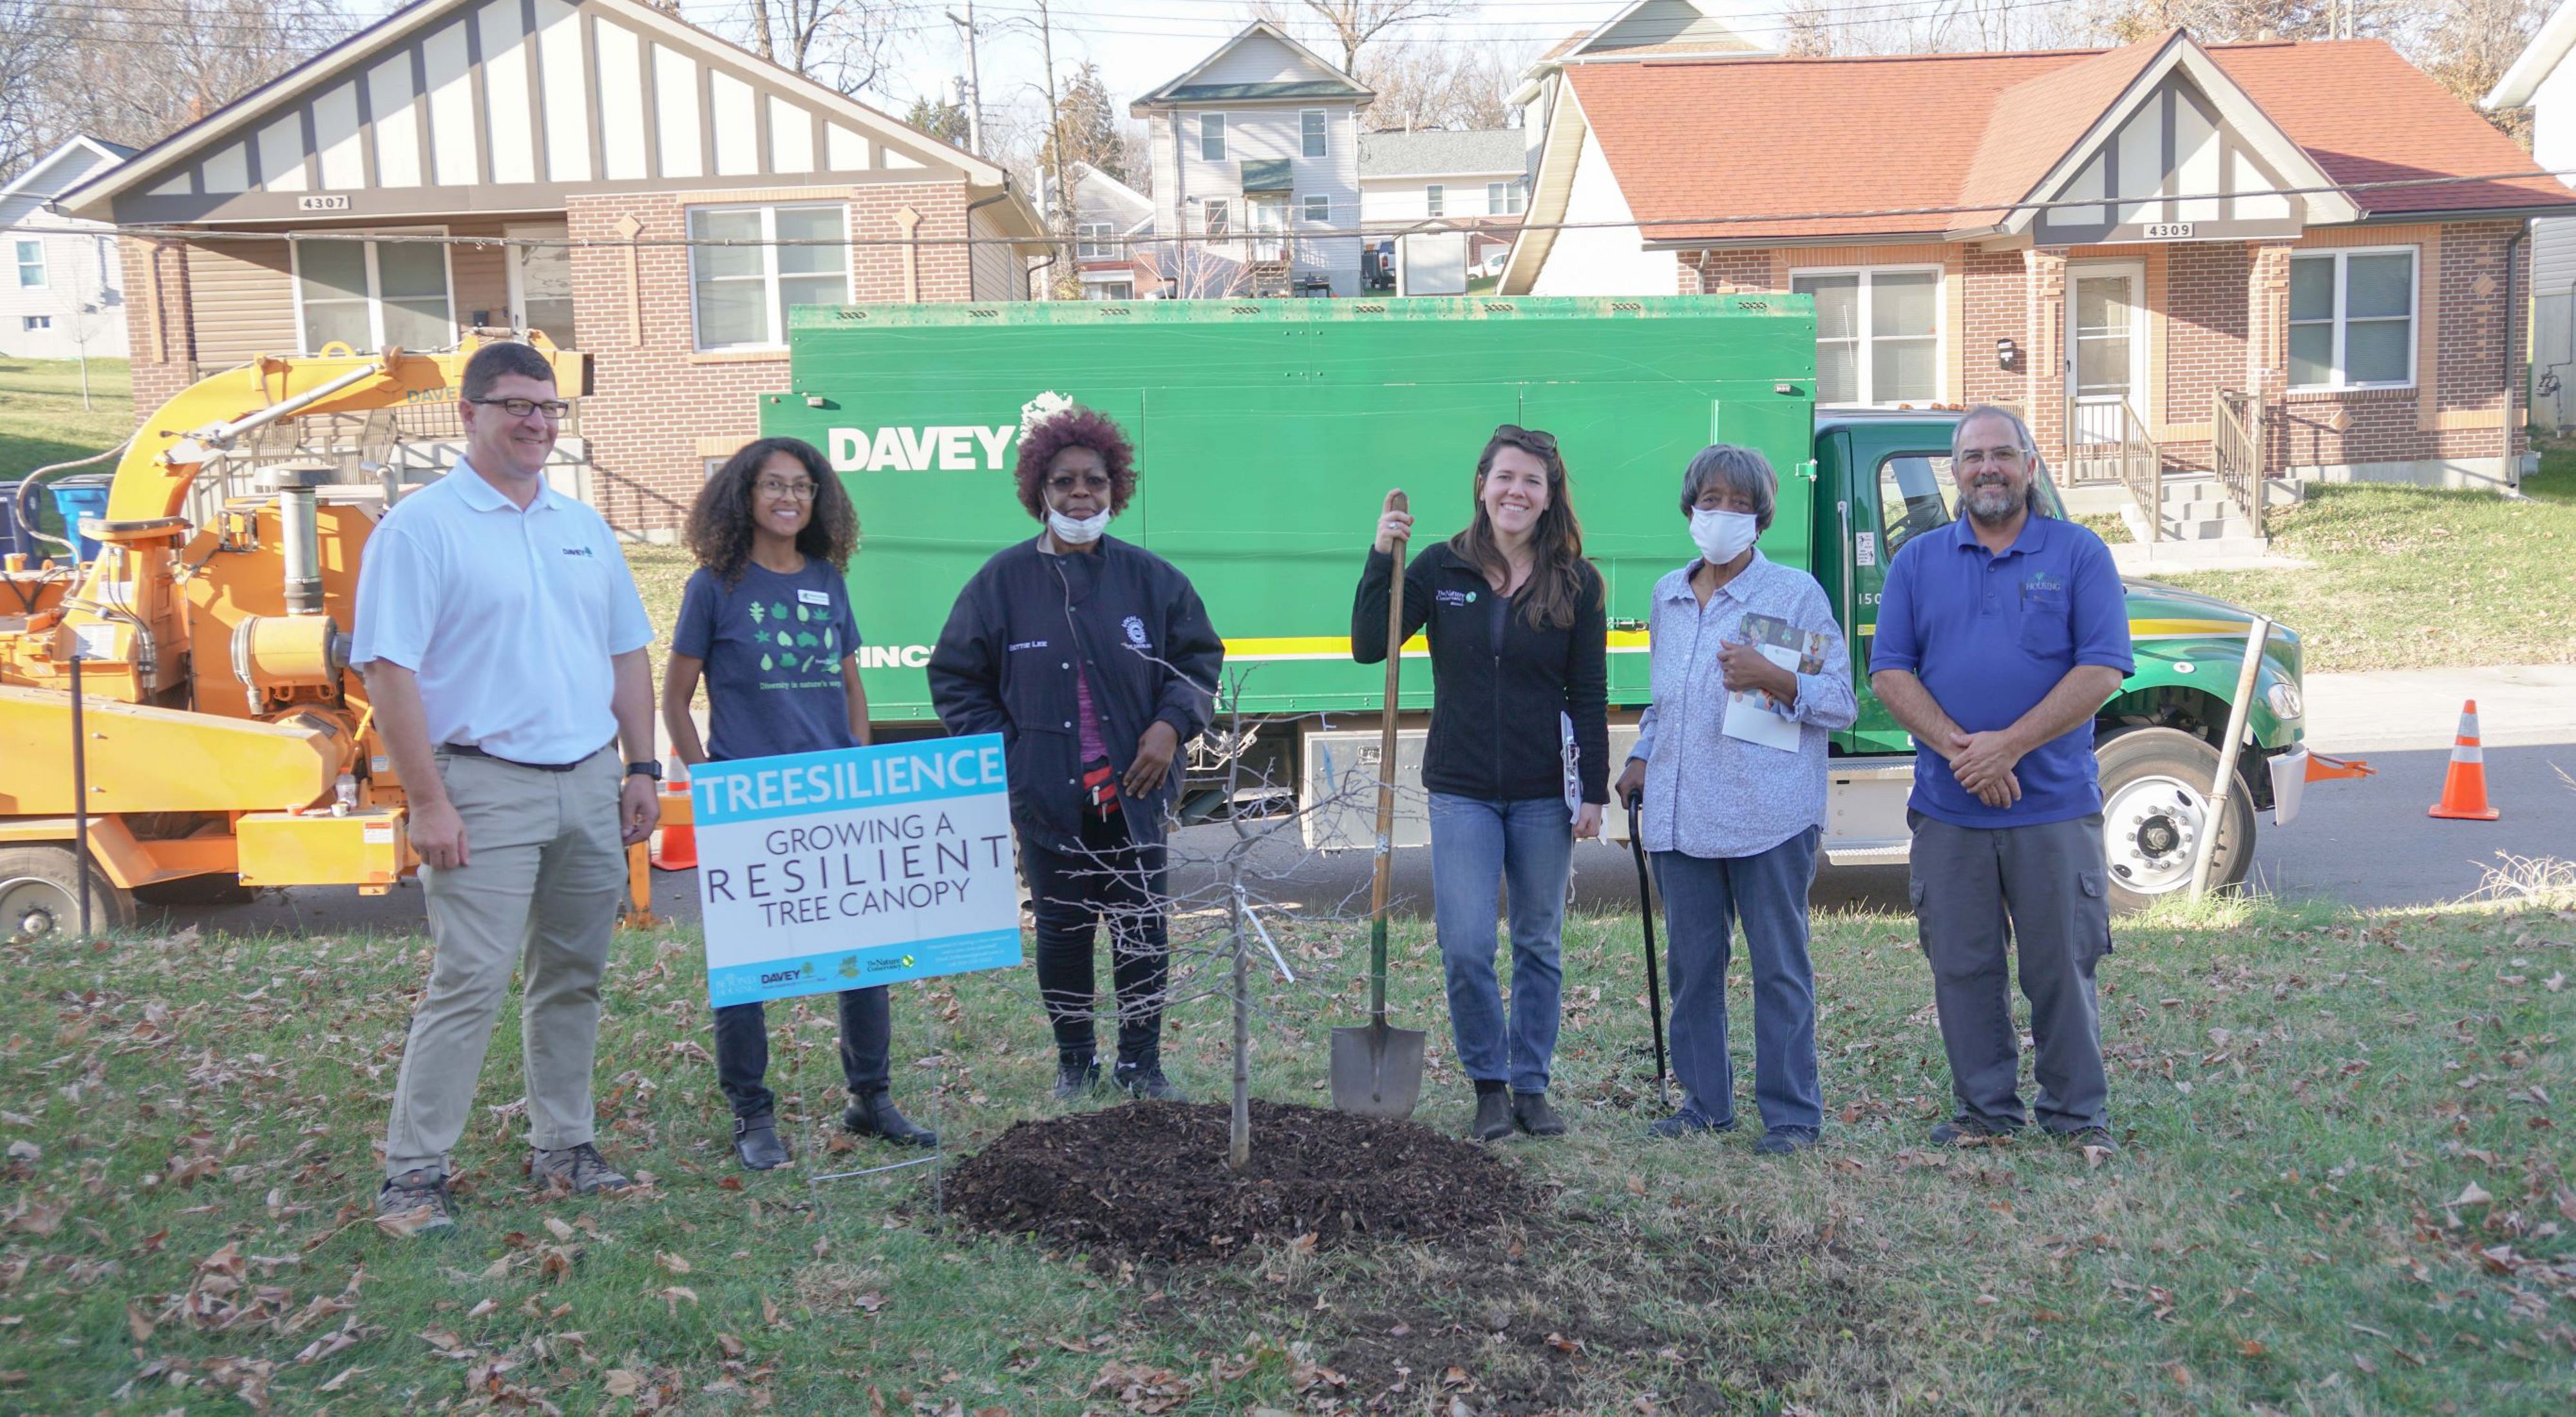 A small group of adults stand by a newly planted tree in an urban back yard.